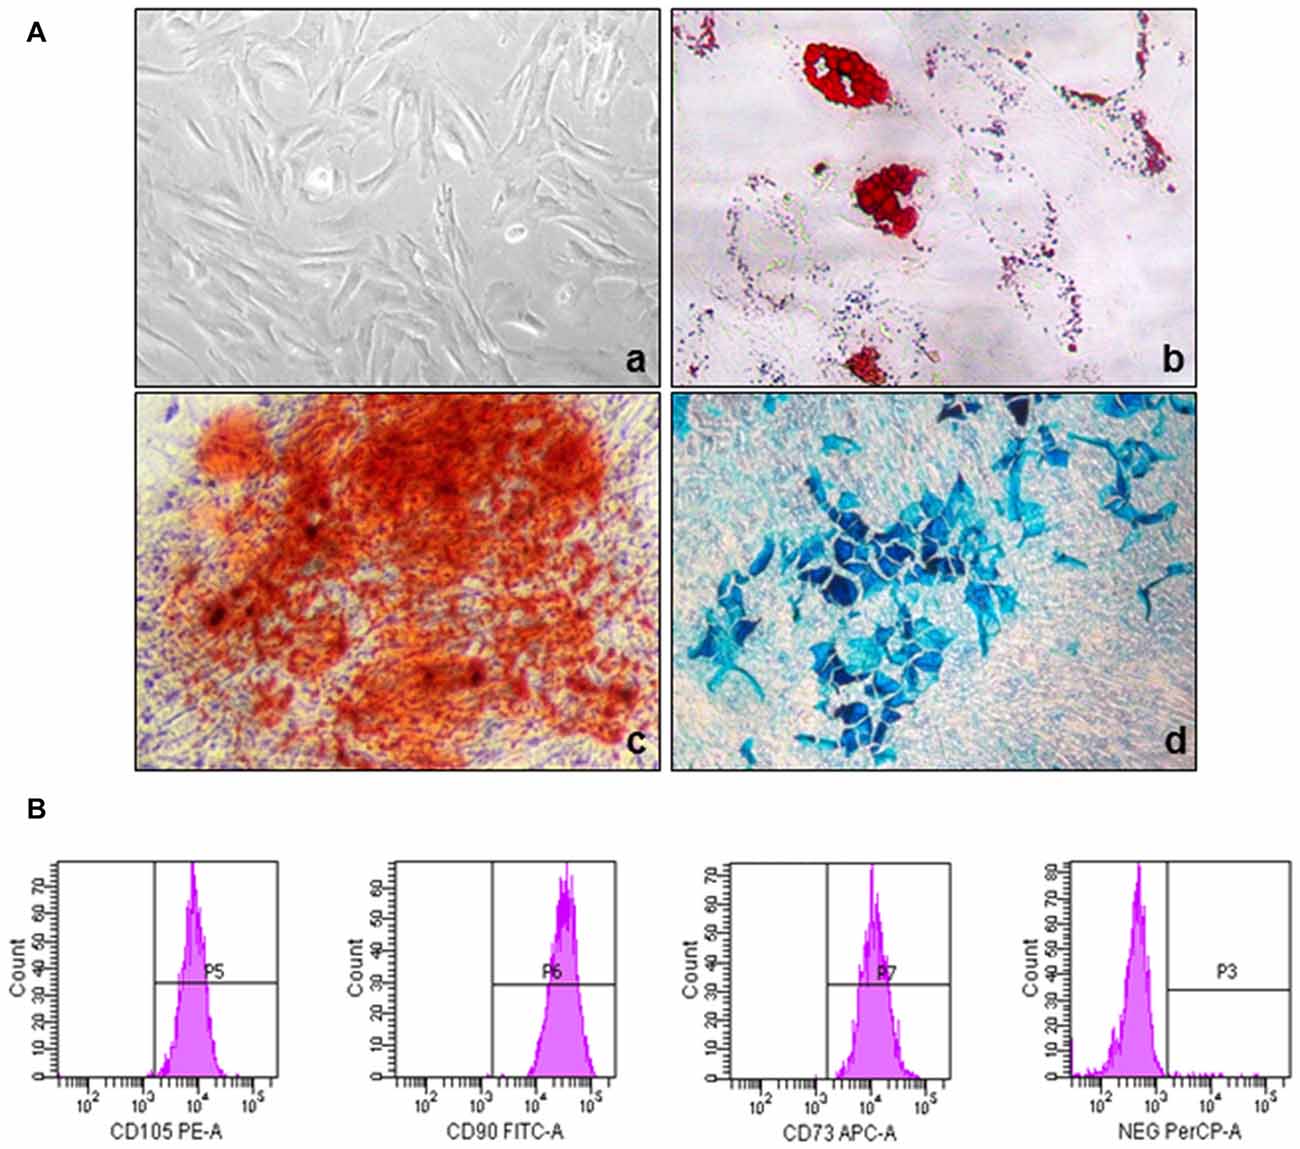 Phenotypic and functional characterization of MSCs